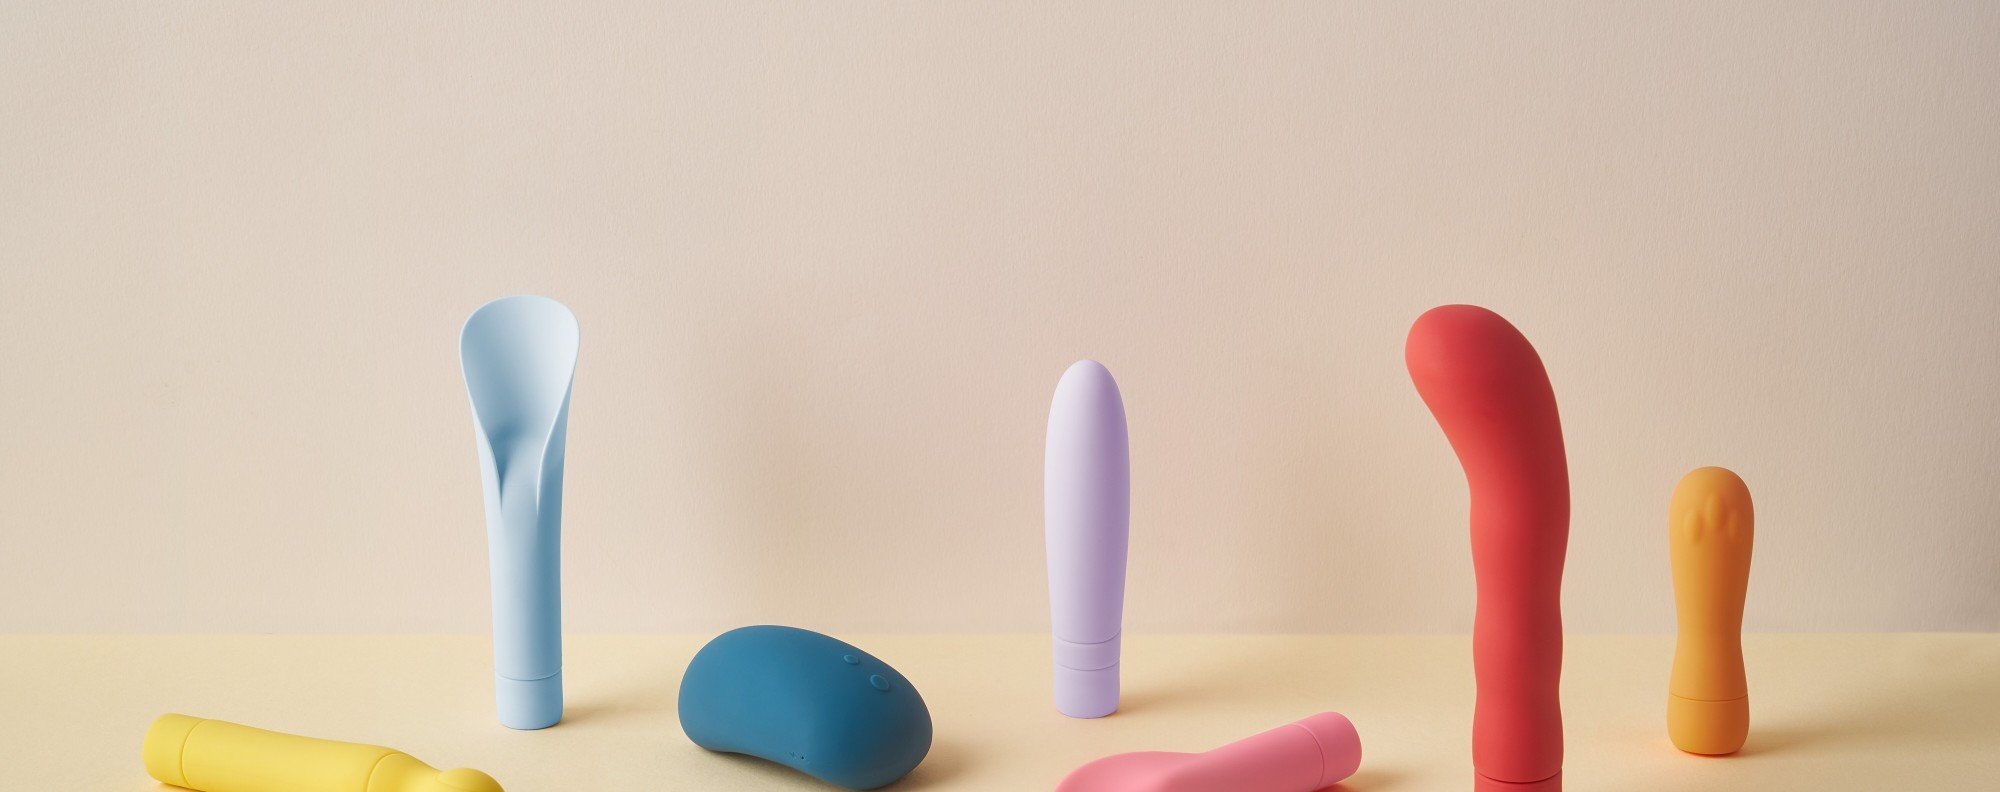 What You Need to Know to Make Money From Home With Your Sex Toys